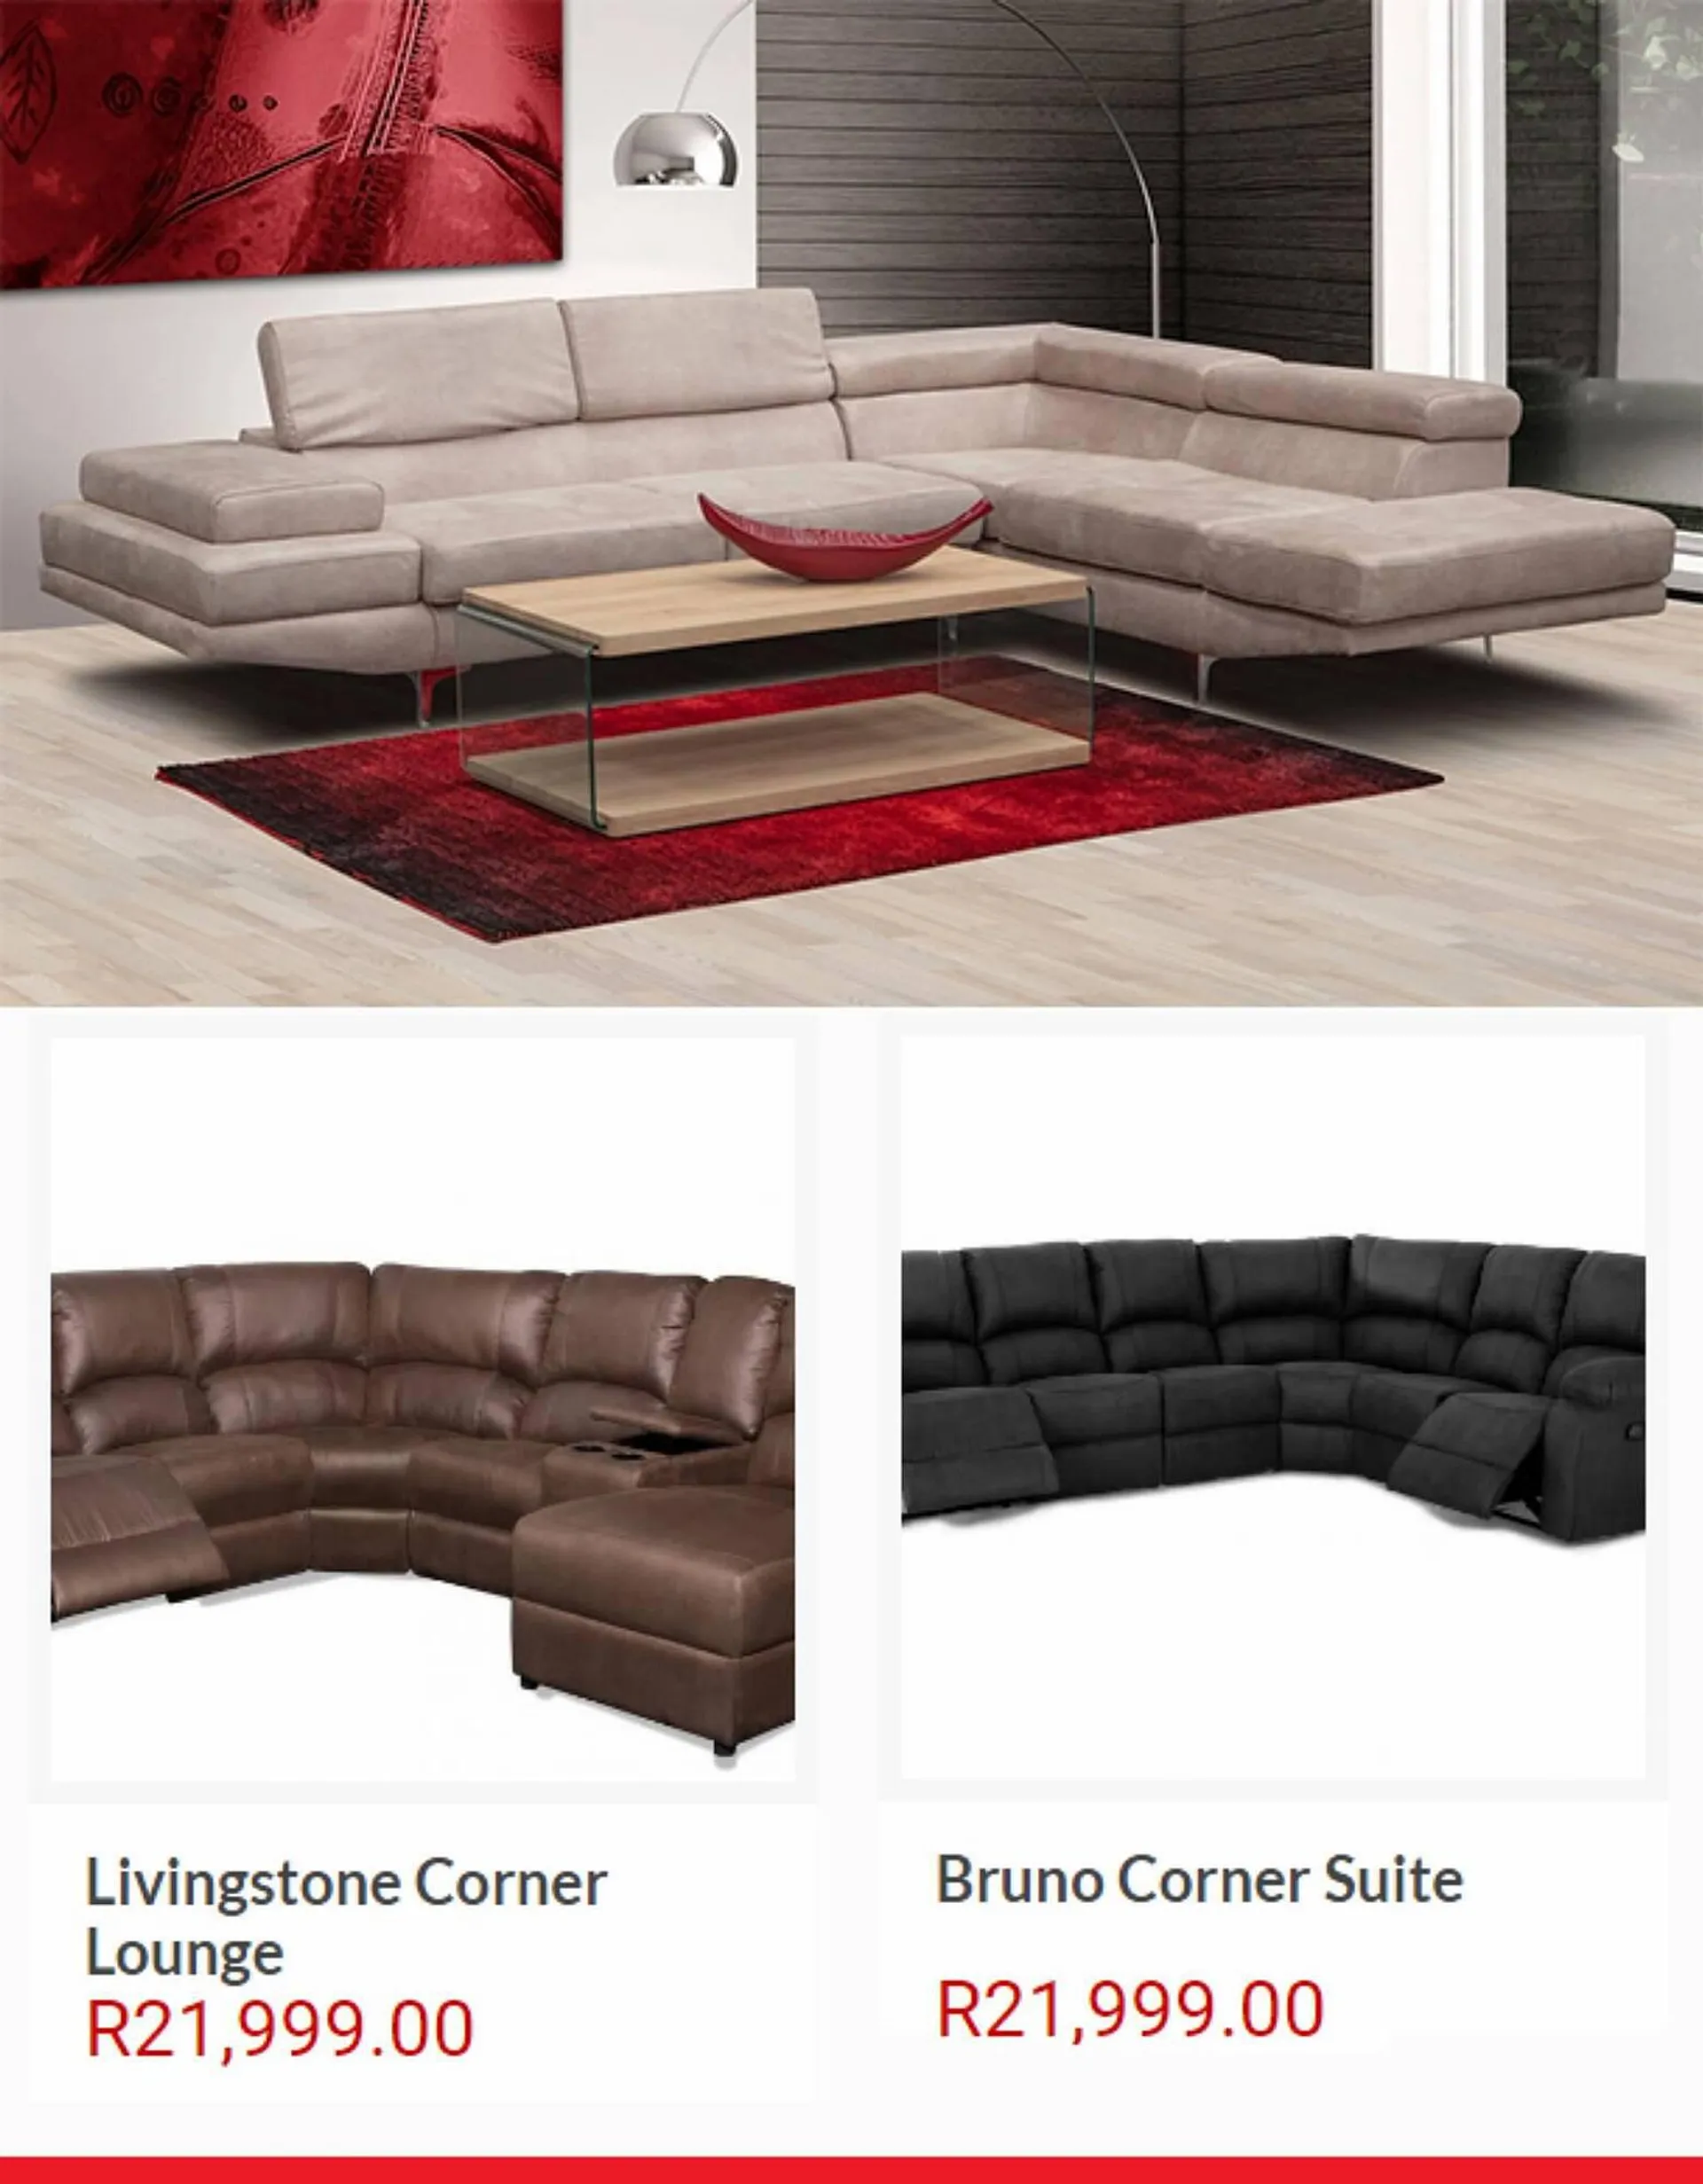 Bed and Lounge catalogue - 5